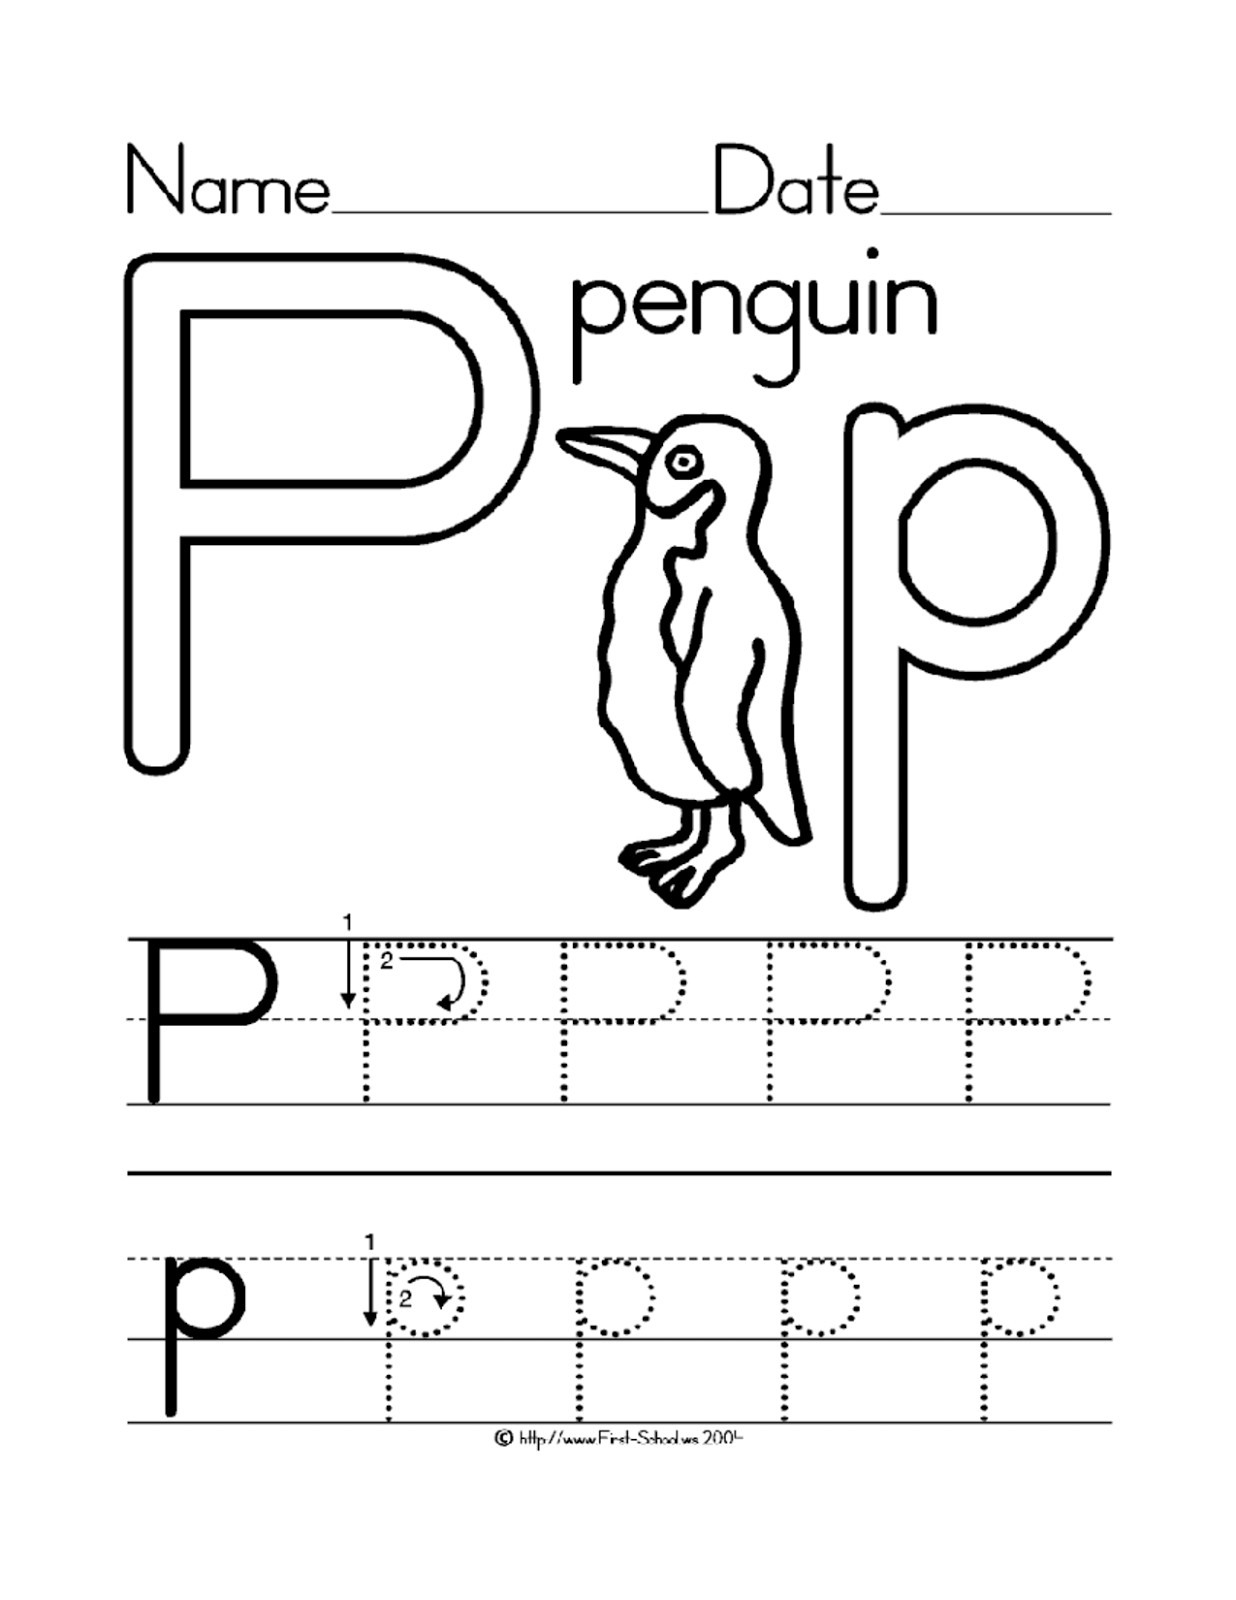 14 Constructive Letter P Worksheets  Kittybabylove